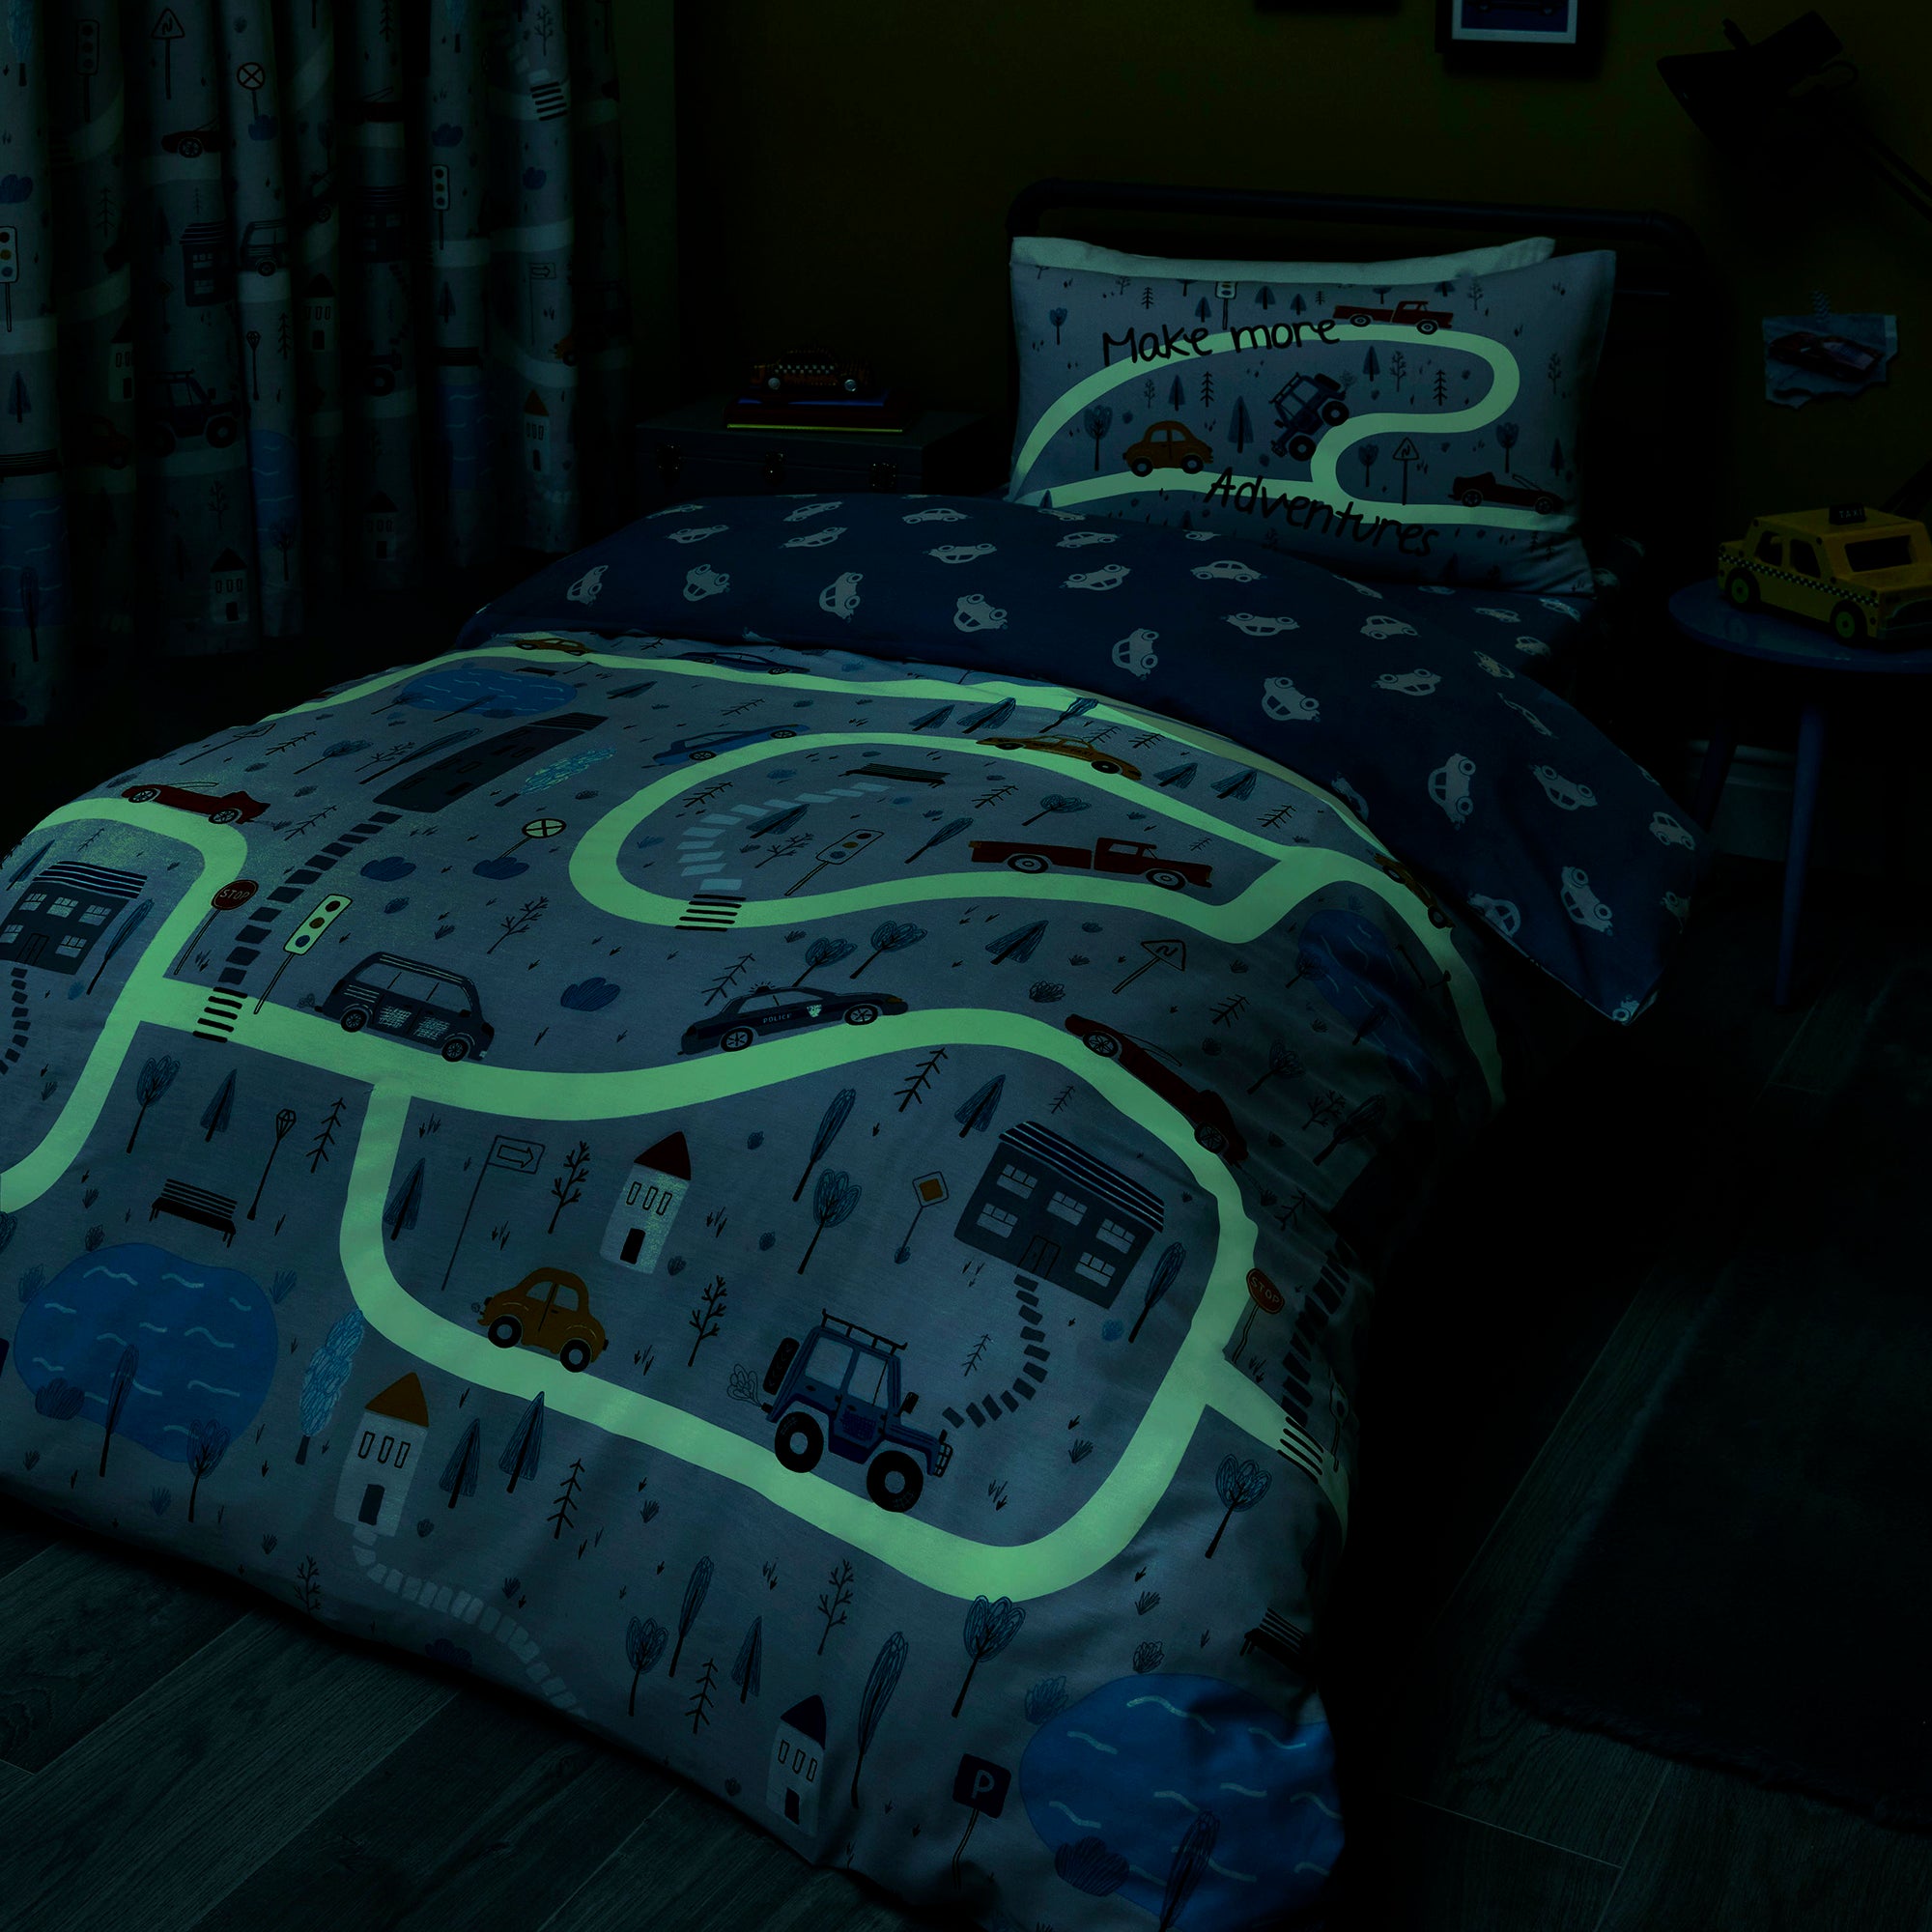 Little Transport - Glow in the Dark Duvet Cover Set, Curtains & Fitted Sheets in Grey - by Bedlam